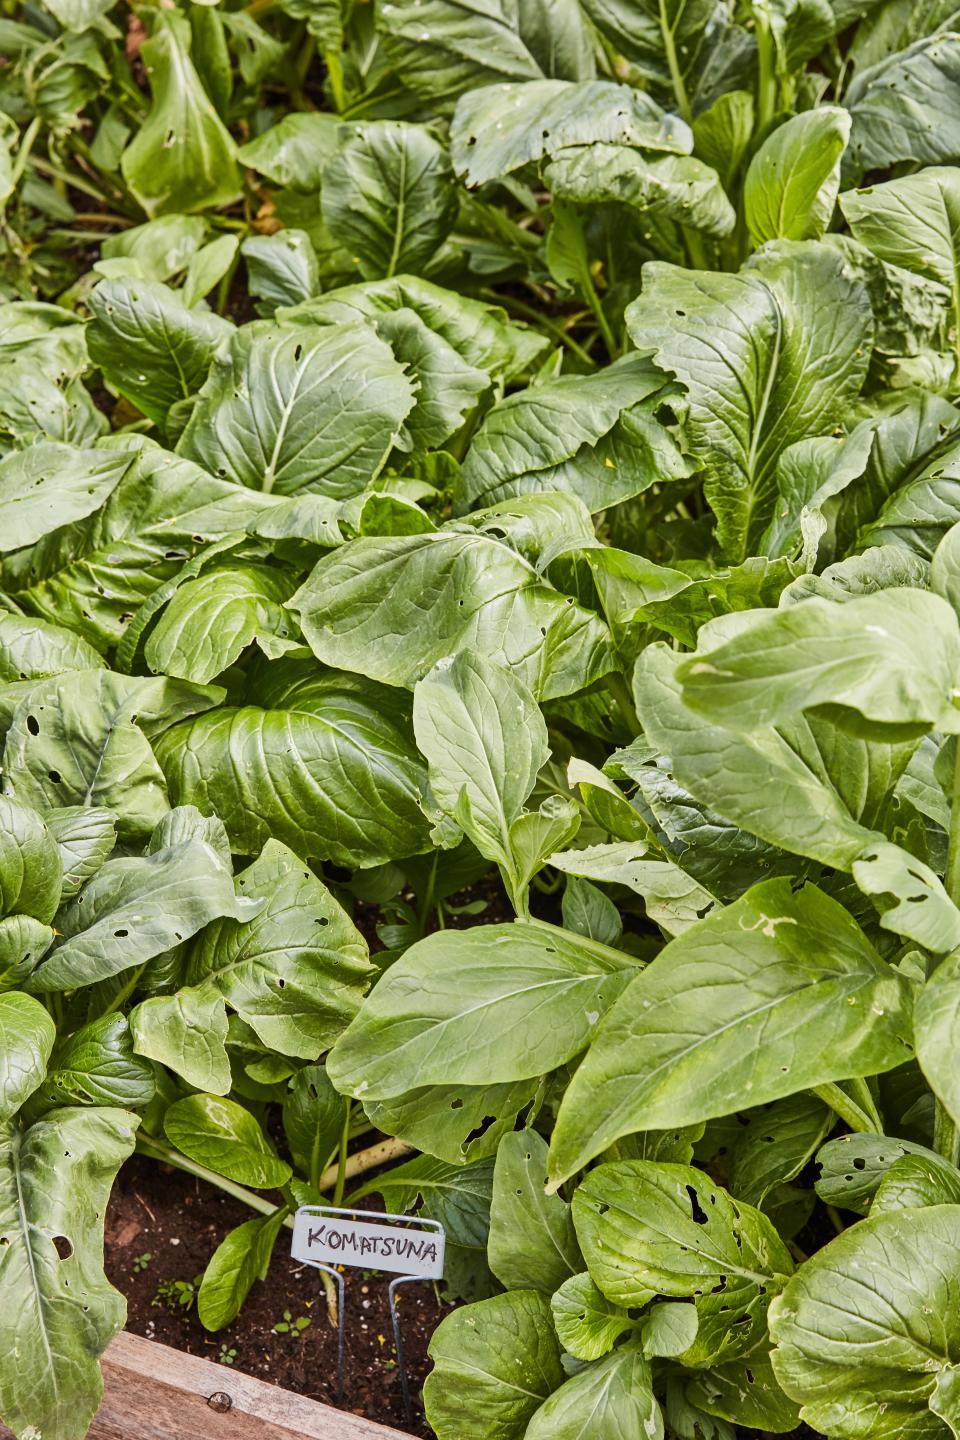 The komatsuna, or Japanese mustard spinach, is thriving.